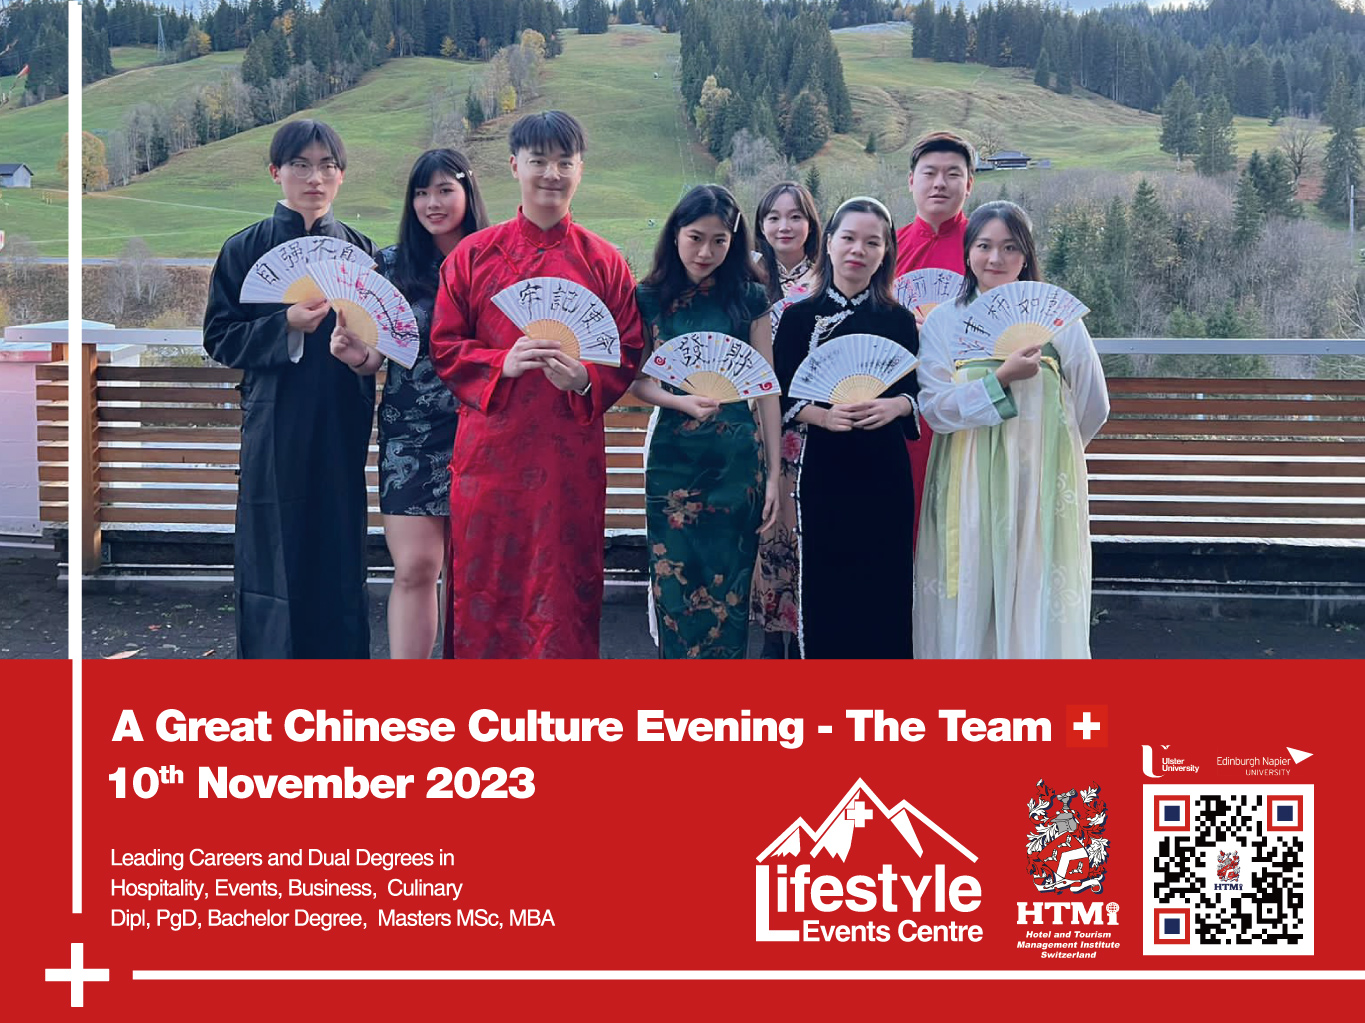 A Great Chinese Culture Evening - The Team + 10th November 2023